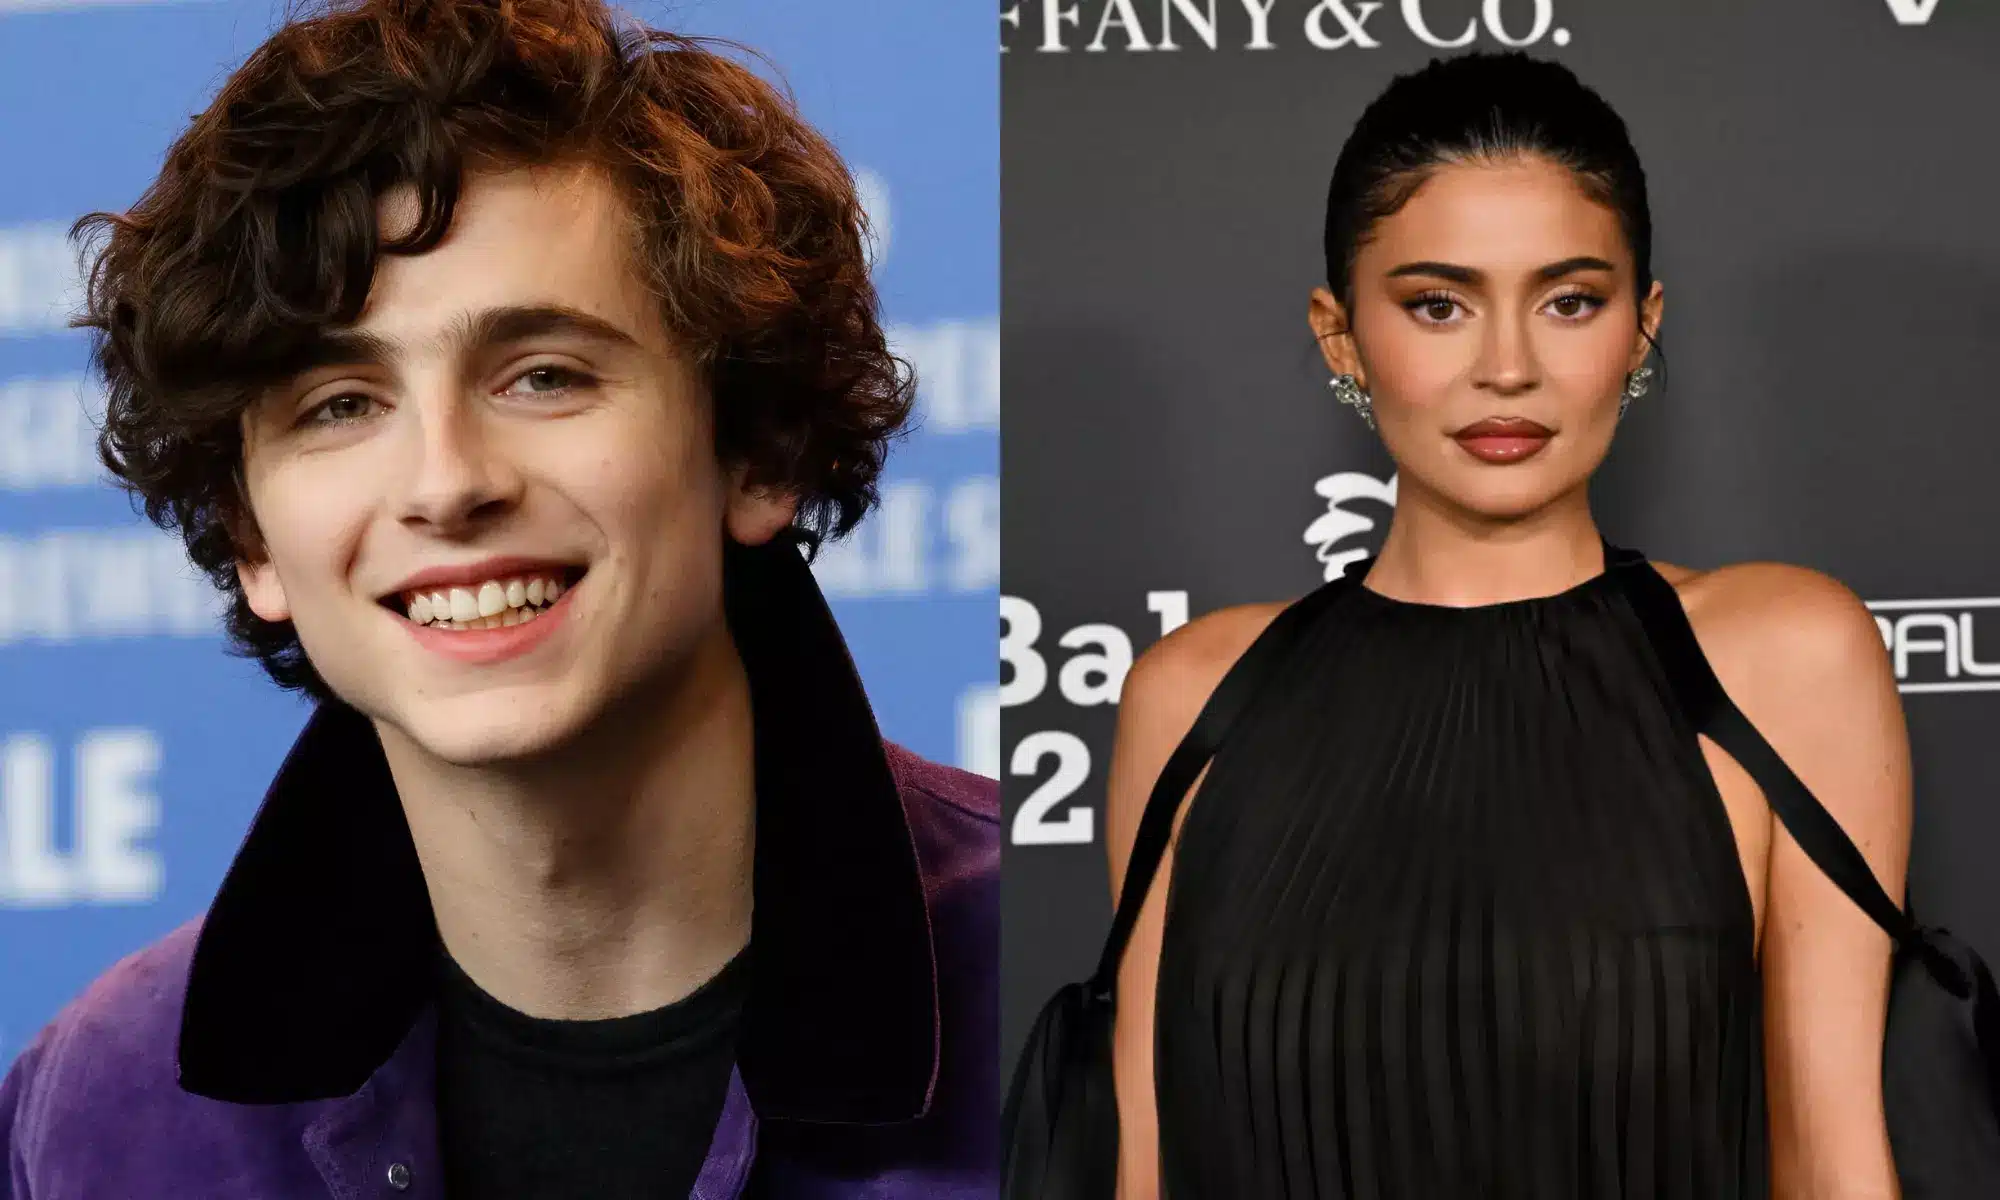 Kylie Jenner and Timothee Chalamet spark romance rumors